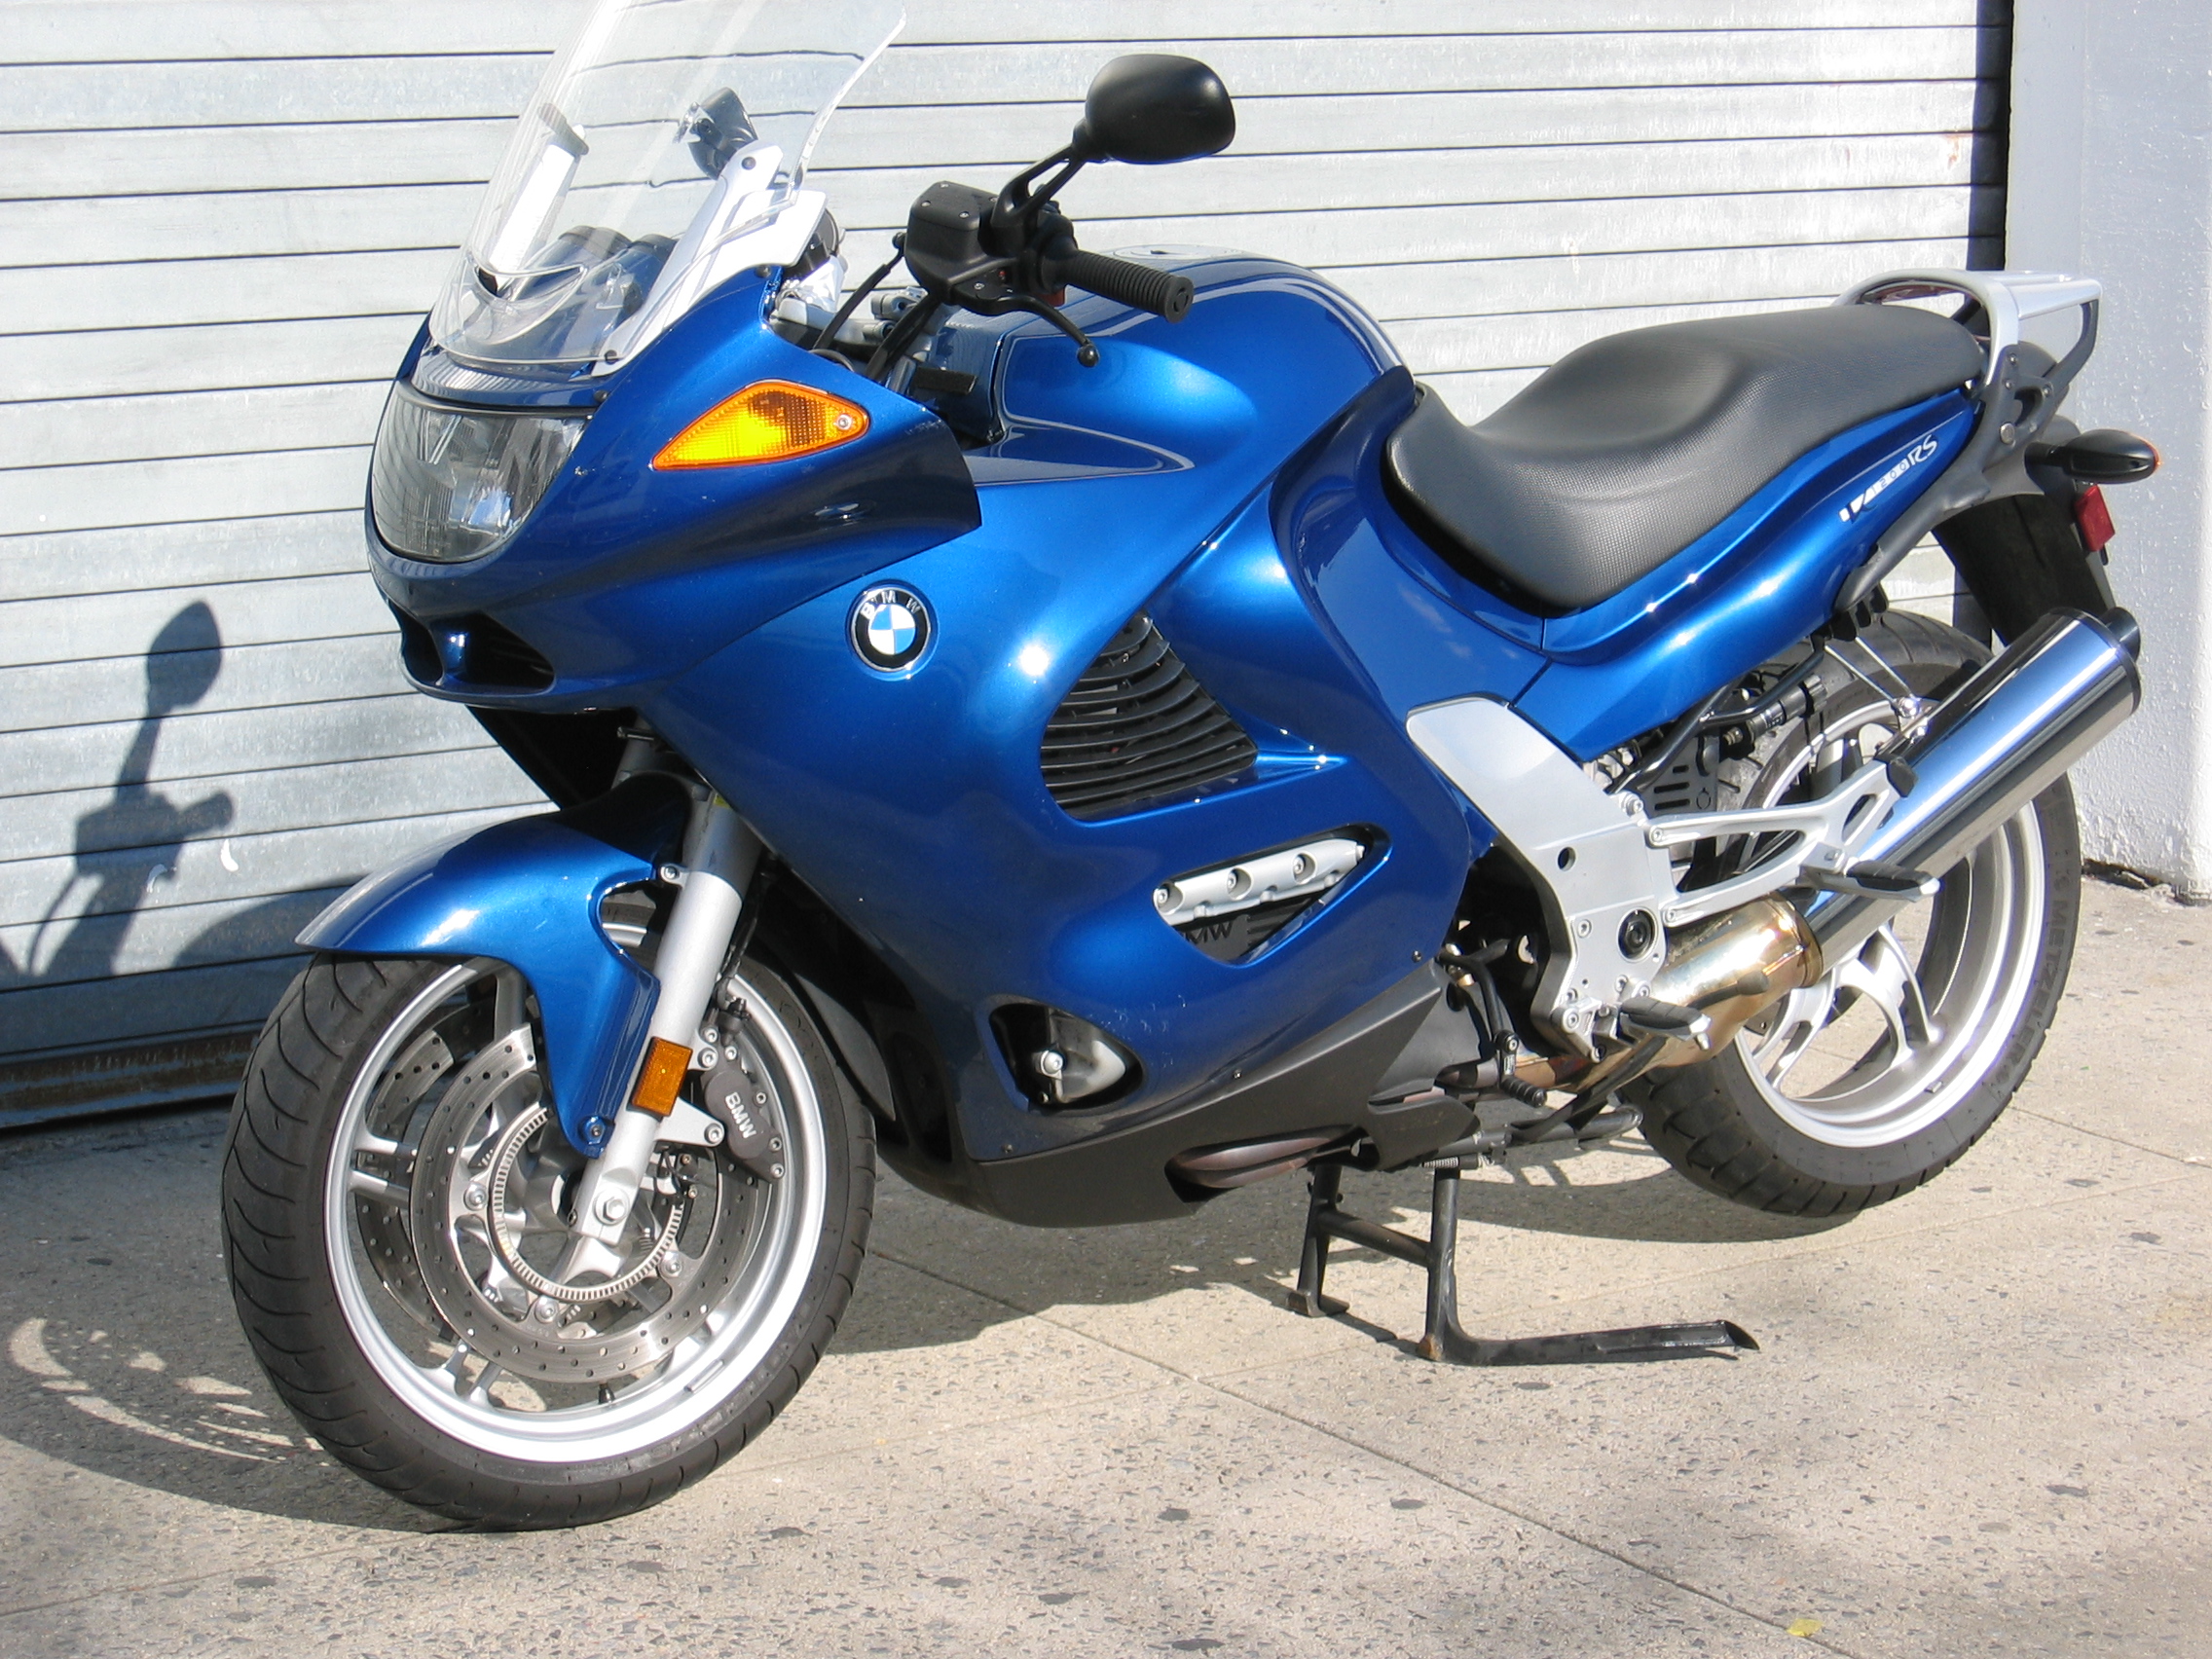 Specs on bmw k1200rs